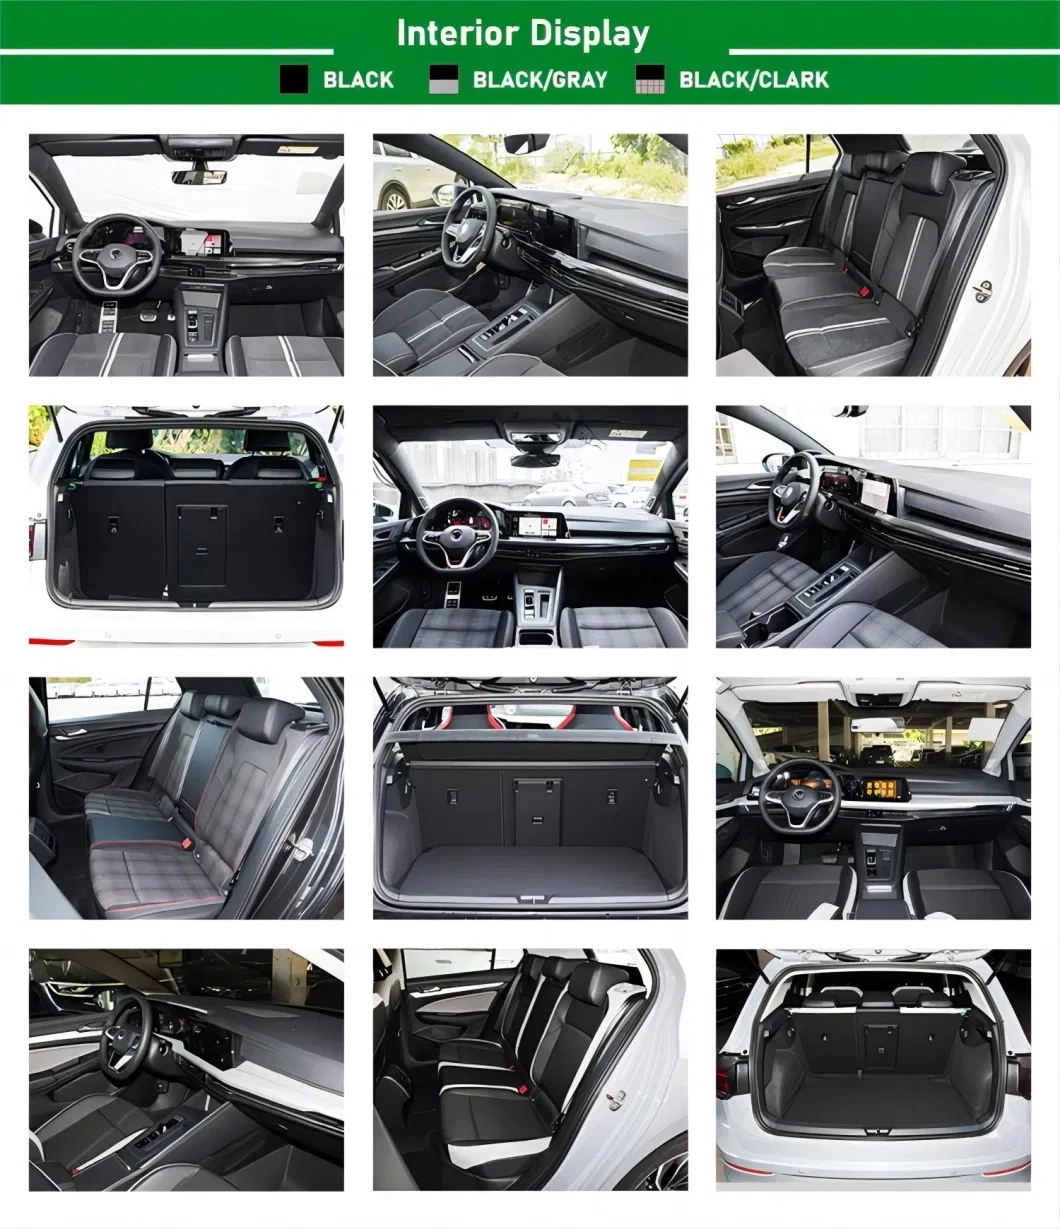 in Stock Used Car 0km New Car Gasoline Petrol Vehicle Volkswagen Golf 280tsi PRO 5 Door 5 Seat Automotive for VW Golf Car